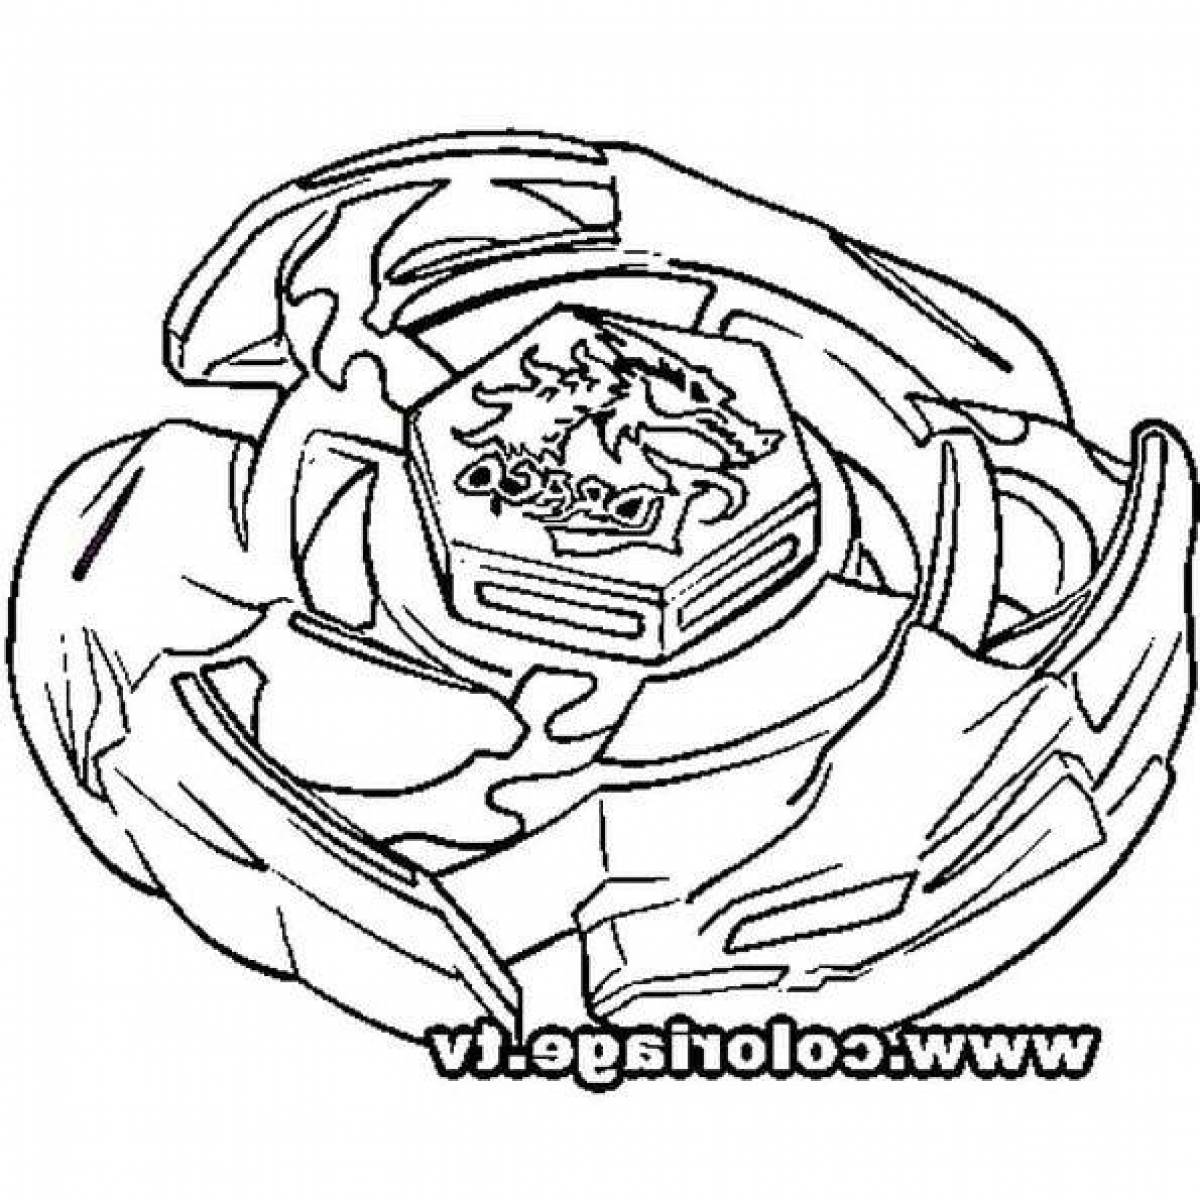 Delightful infiniti need coloring page